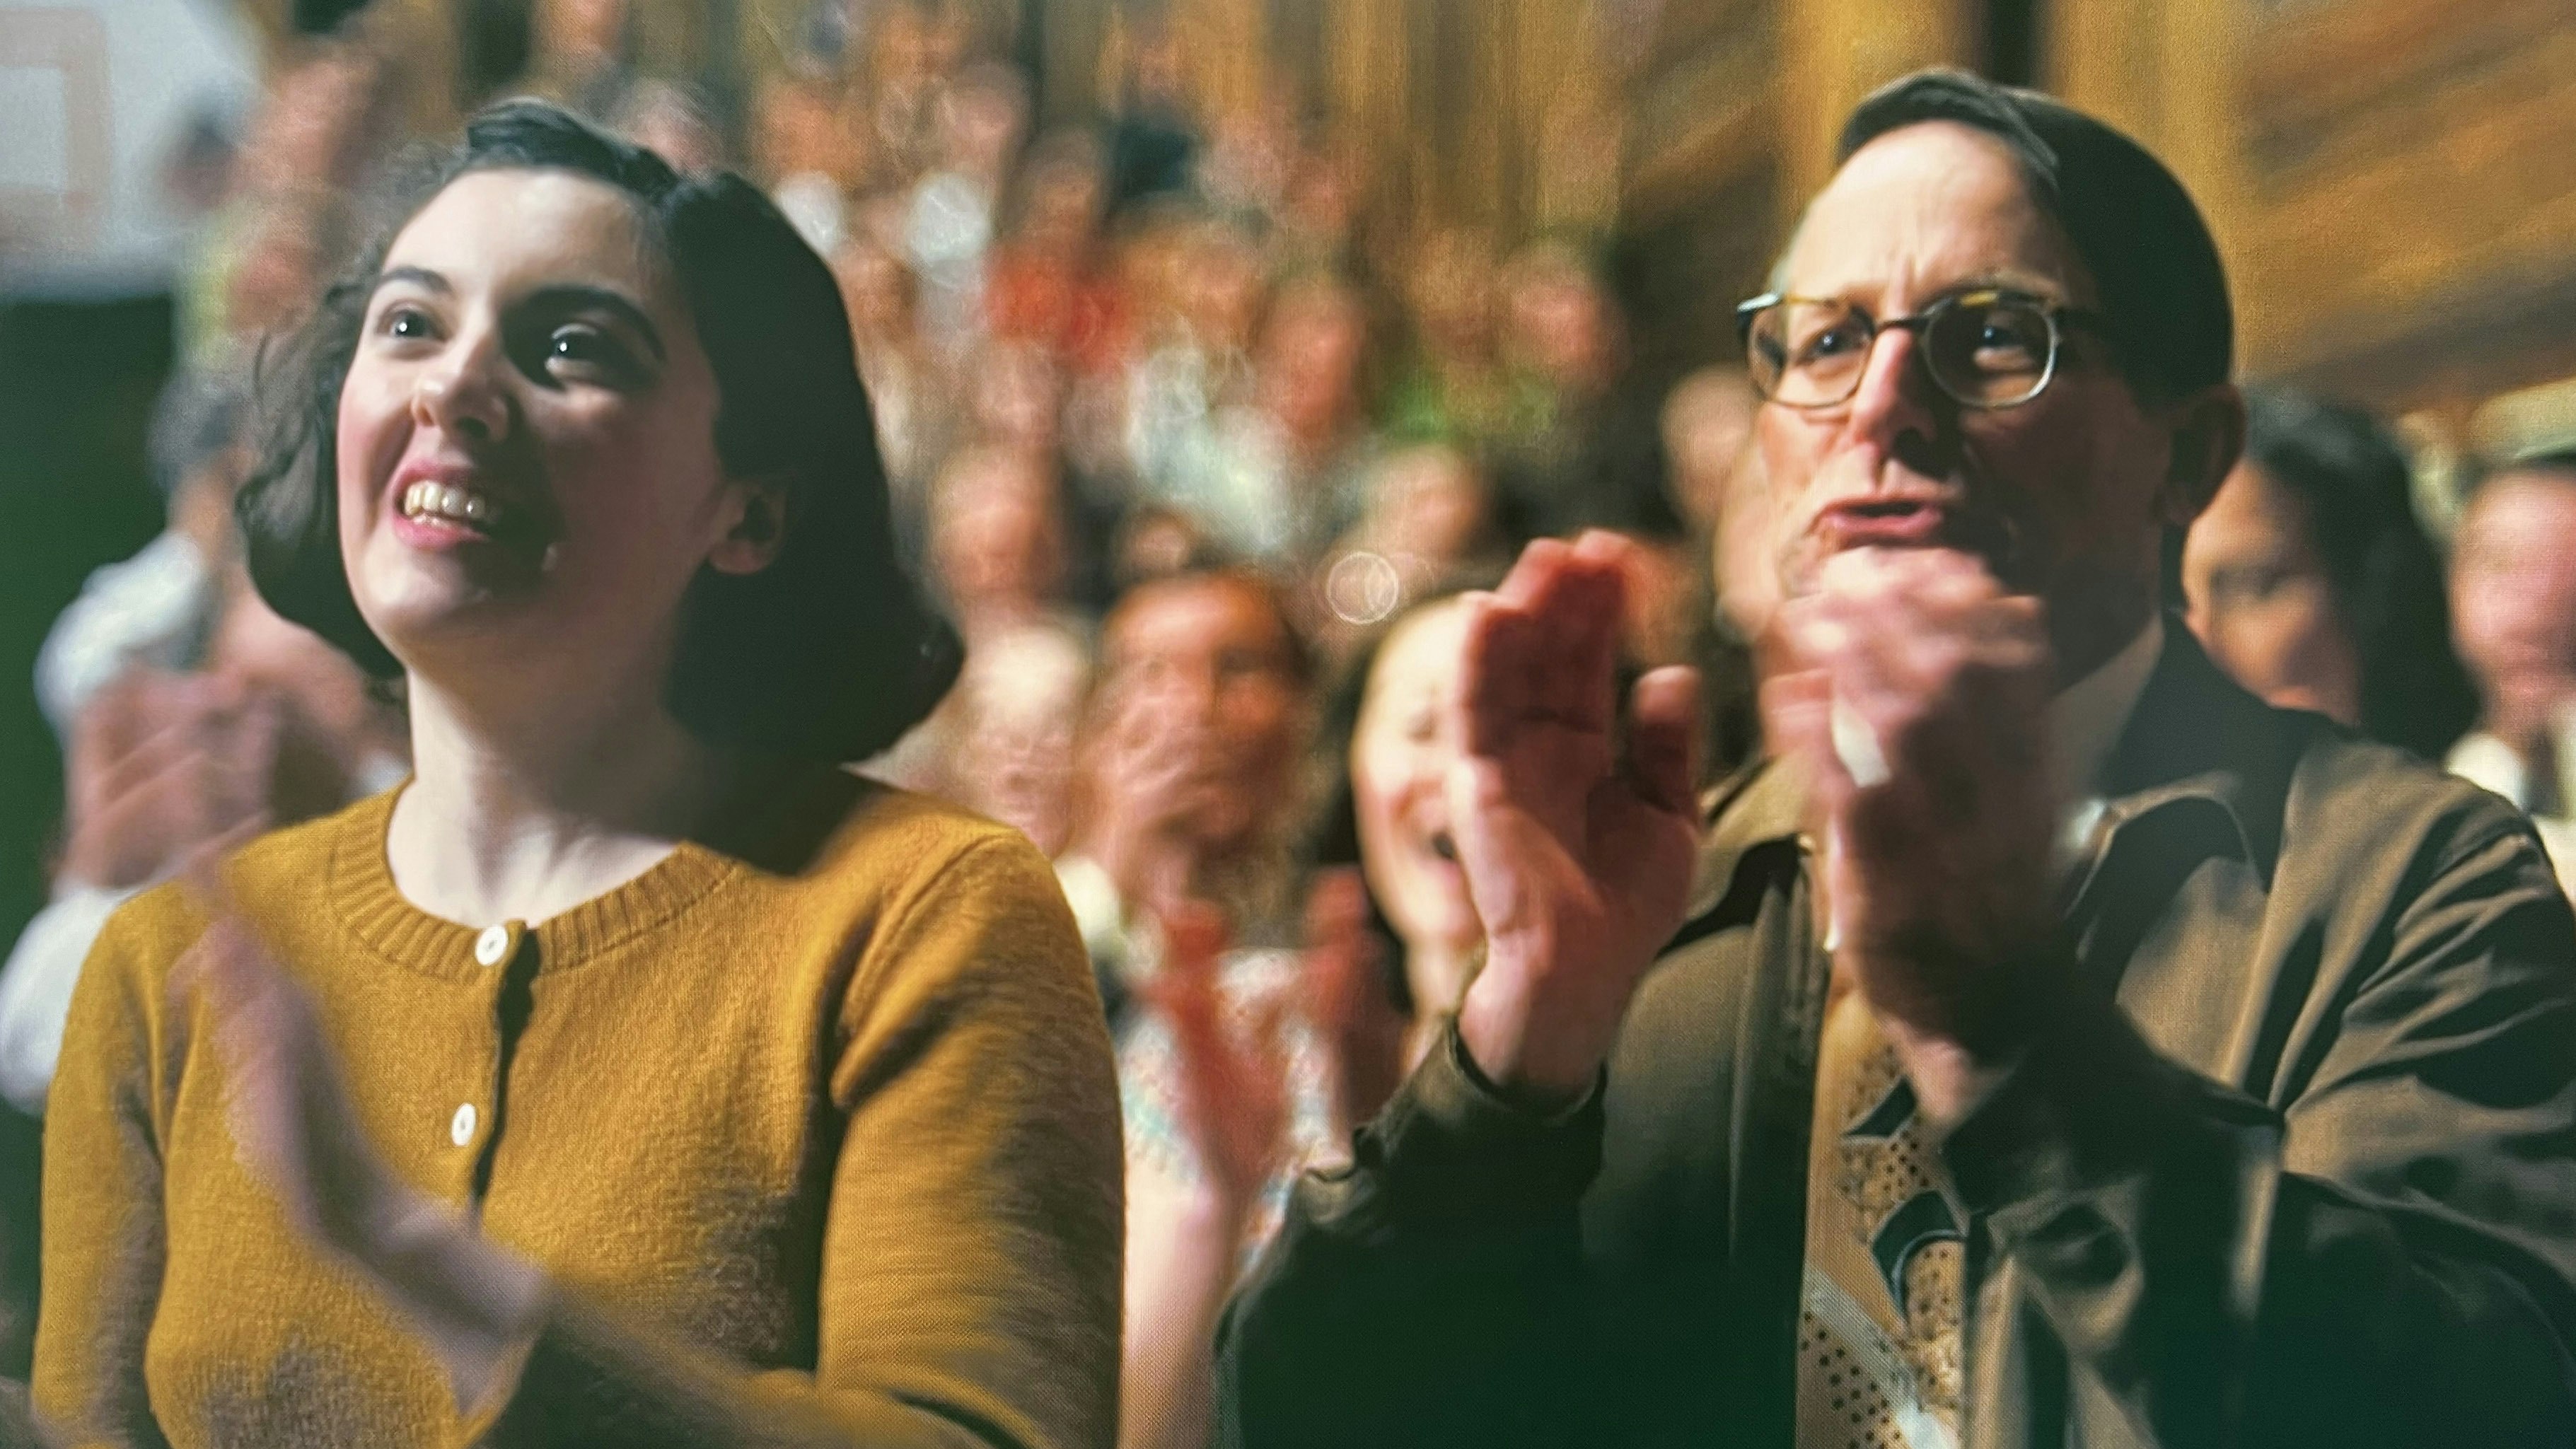 Brooke Sawyer, left, and Garth Dowling in a close-up shot during the auditorium scene in the blockbuster movie "Oppenheimer." Dowling spent four decades as a photojournalist in Jackson before moving and becoming an extra in the movie.